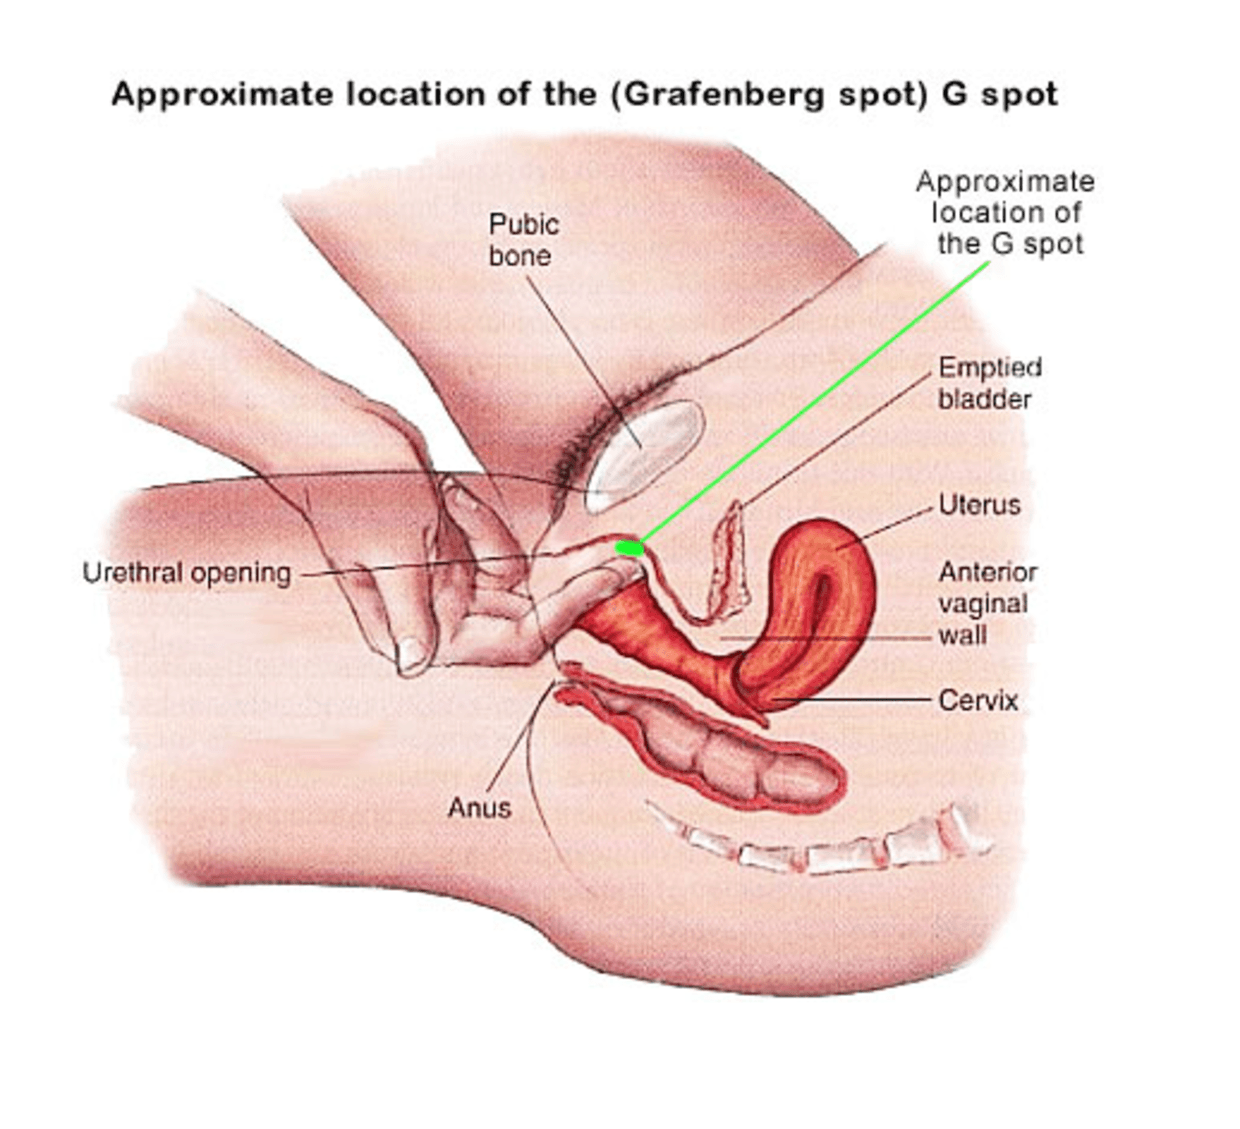 Do i have to pee to have g spot orgasm